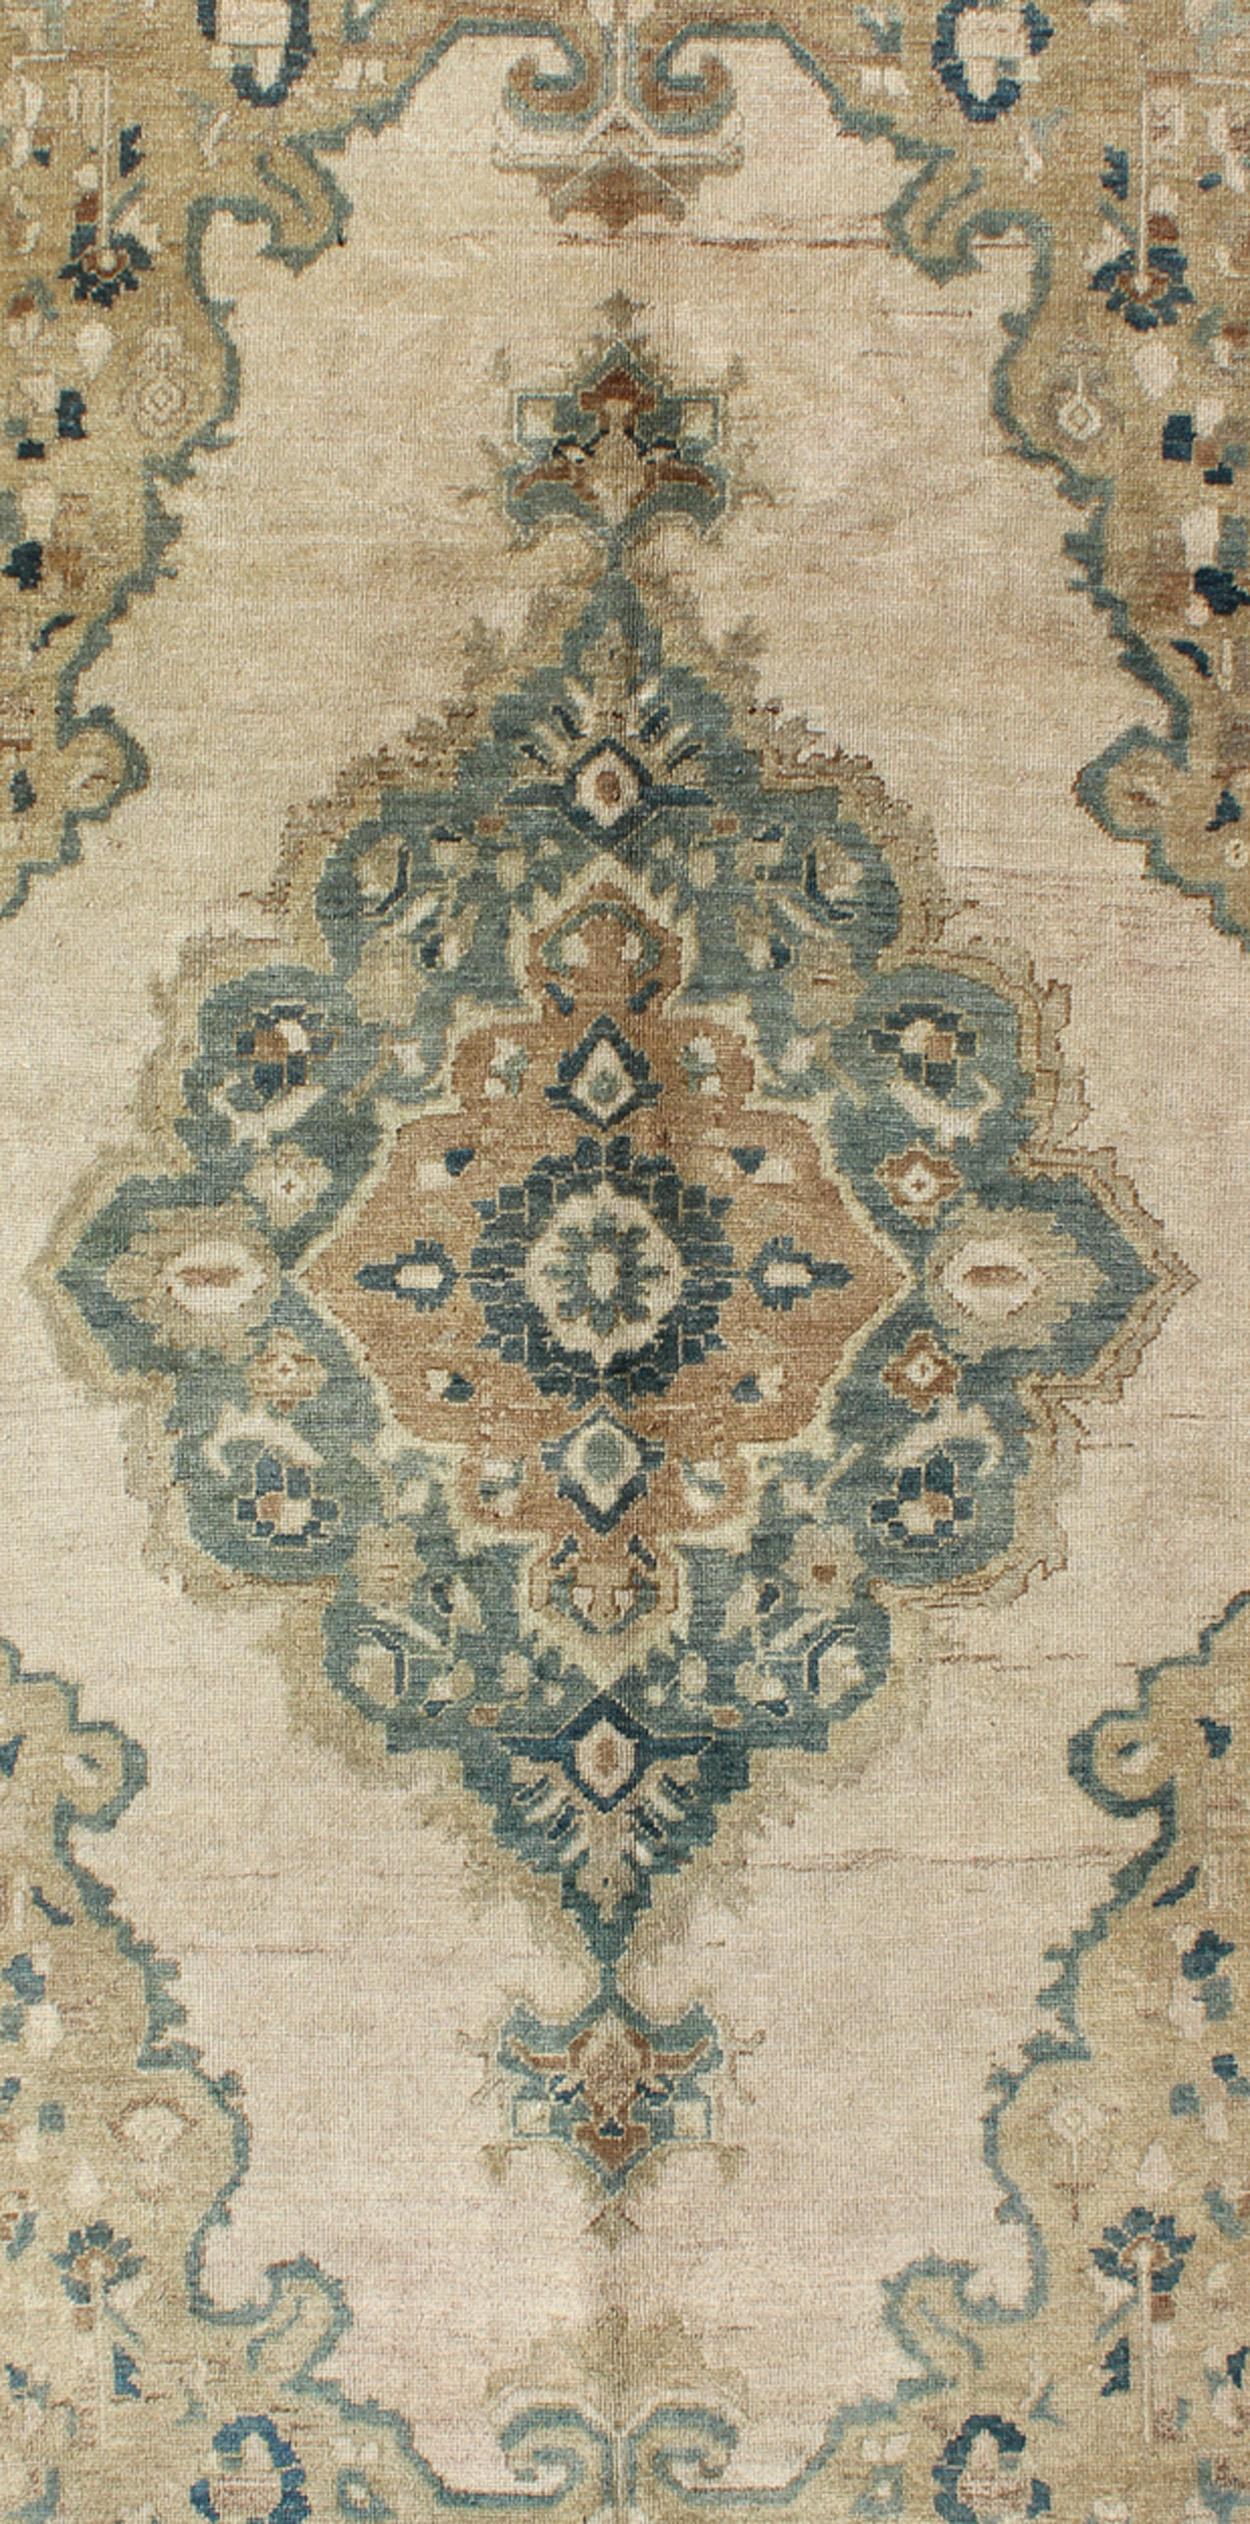 Measures: 5'2 x 9'11.

This vintage Turkish Oushak rug features a unique blend of colors and an intricately beautiful design. The multi-layered central medallion is complemented by a symmetrical set of floral motifs in the field and surrounding